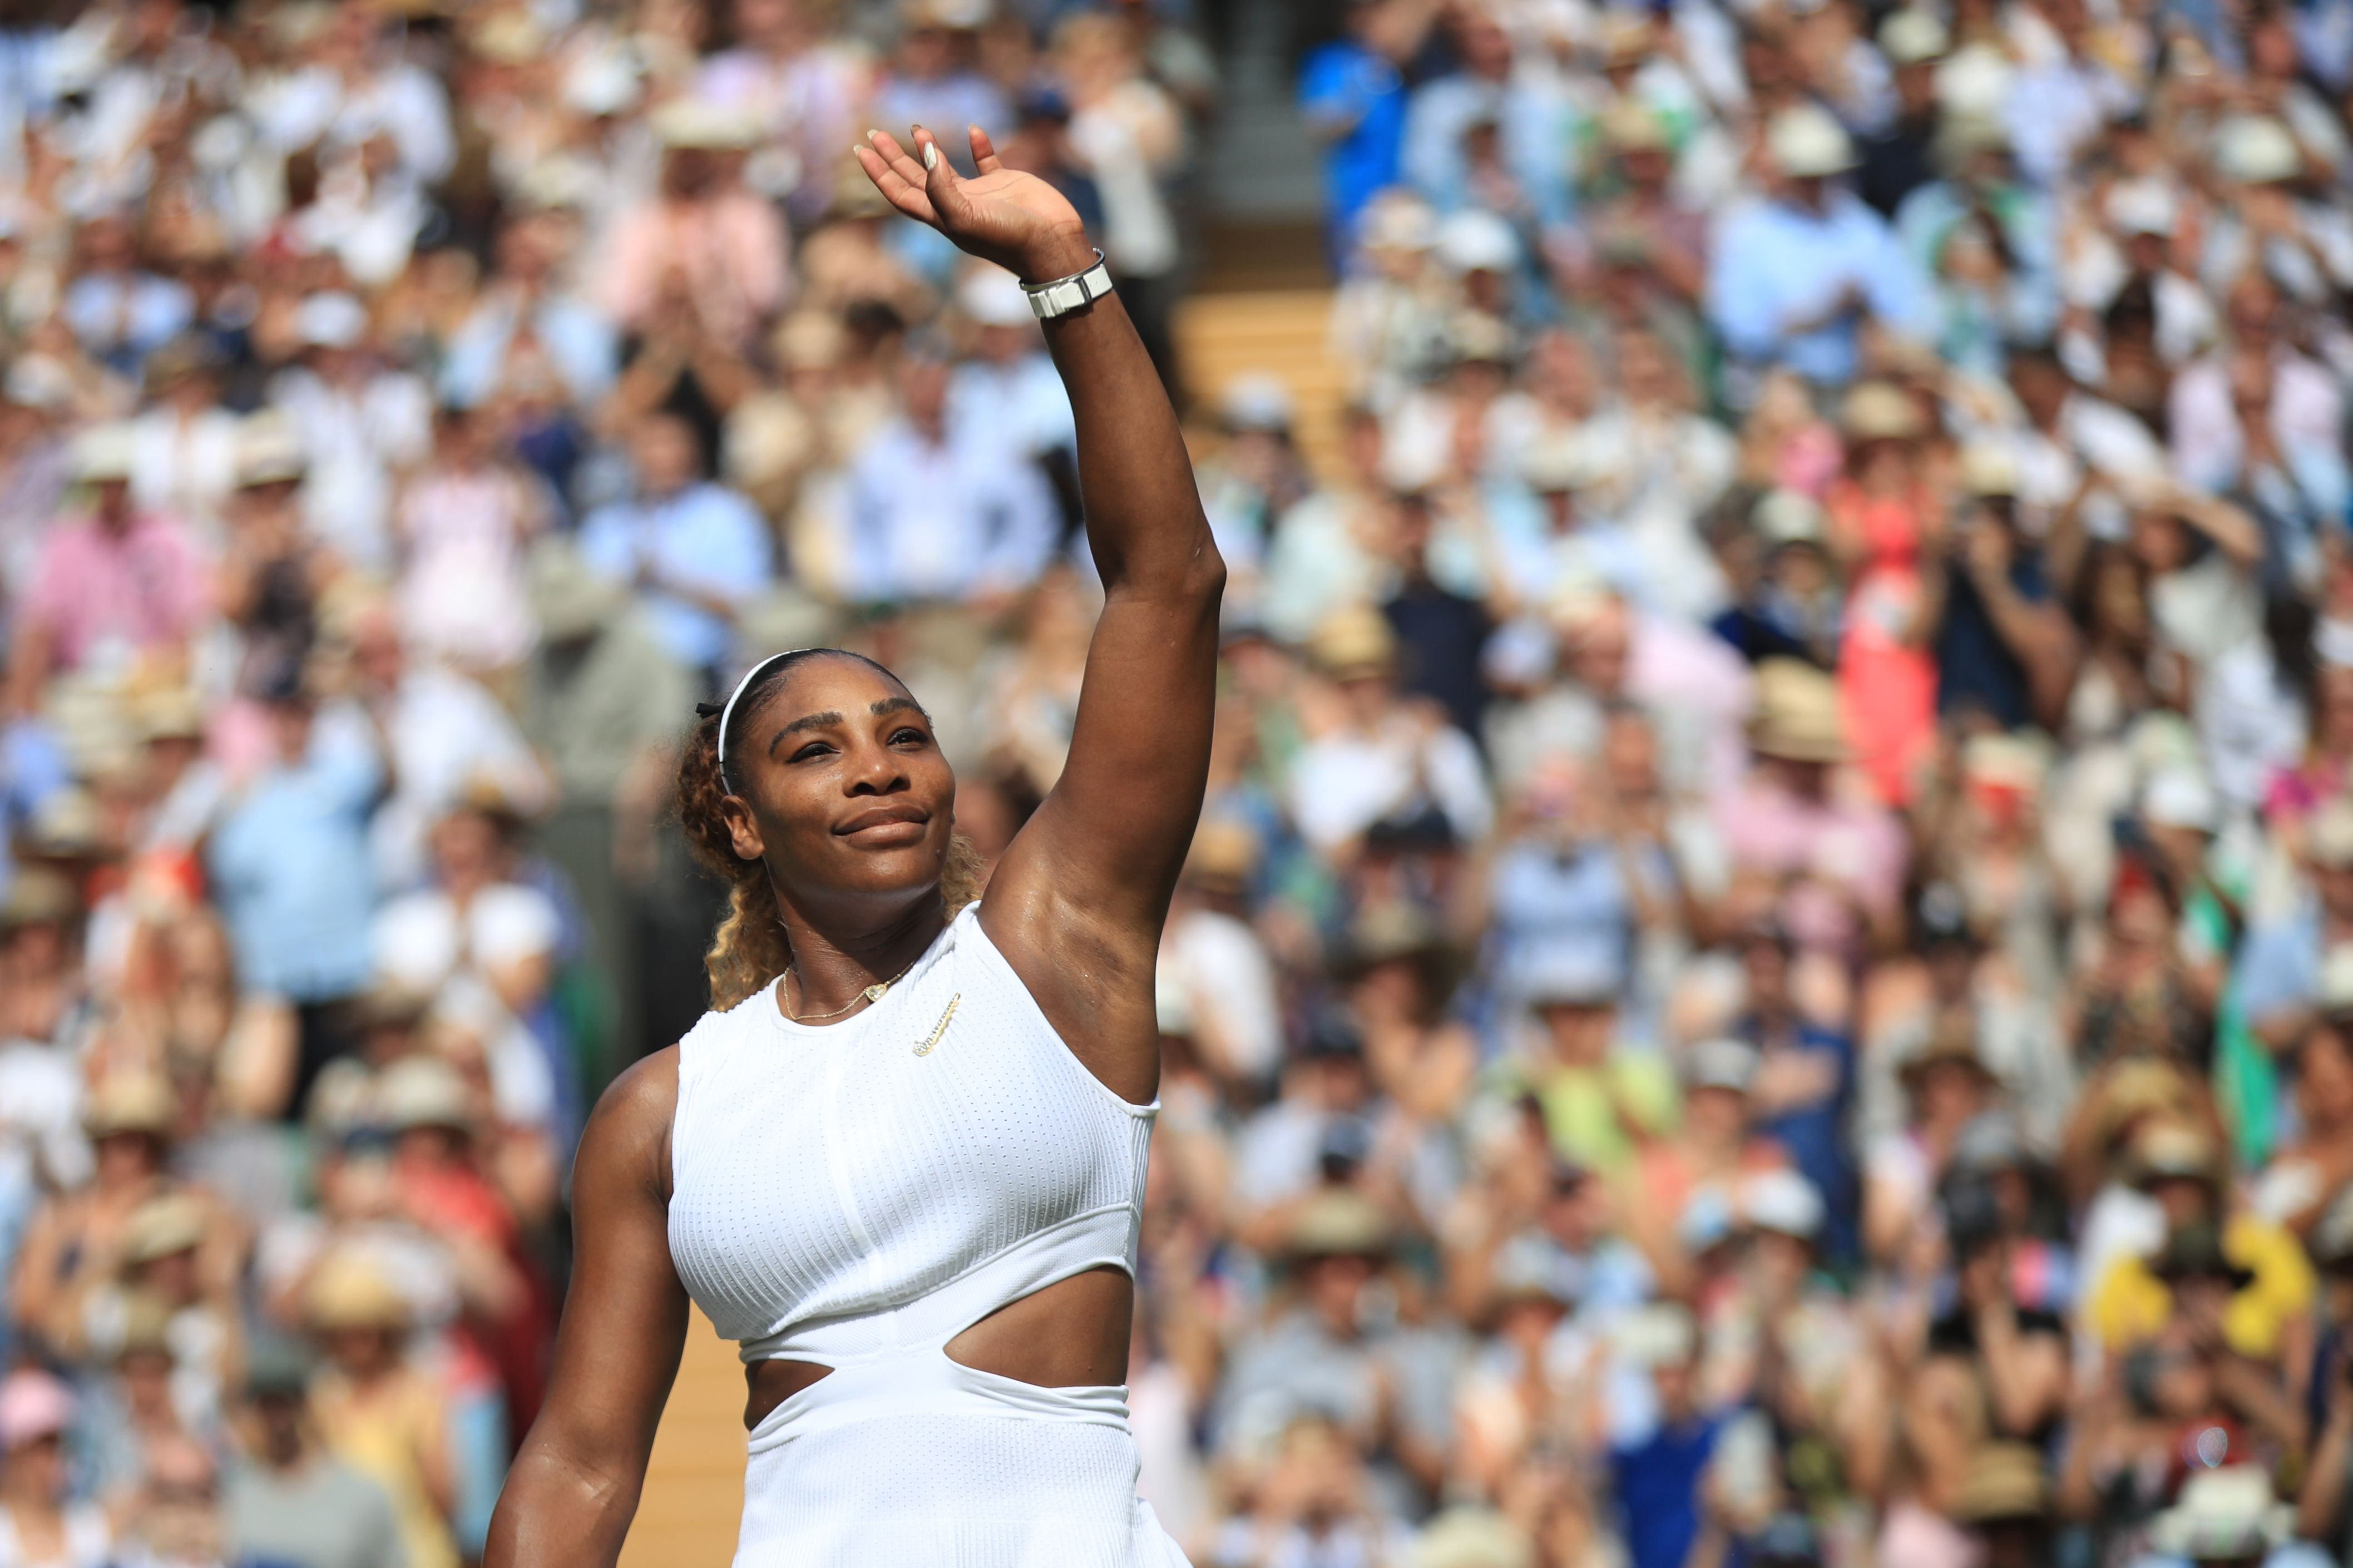 Serena Williams of the United States defeats Barbora Strycova of the Czech Republic during the women's singles semifinal at the 2019 Wimbledon Championships in Wimbledon, southwest London on May 11, 2019 in Wimbledon, southwest London, (Photo by Adam DAVY/POL/AFP